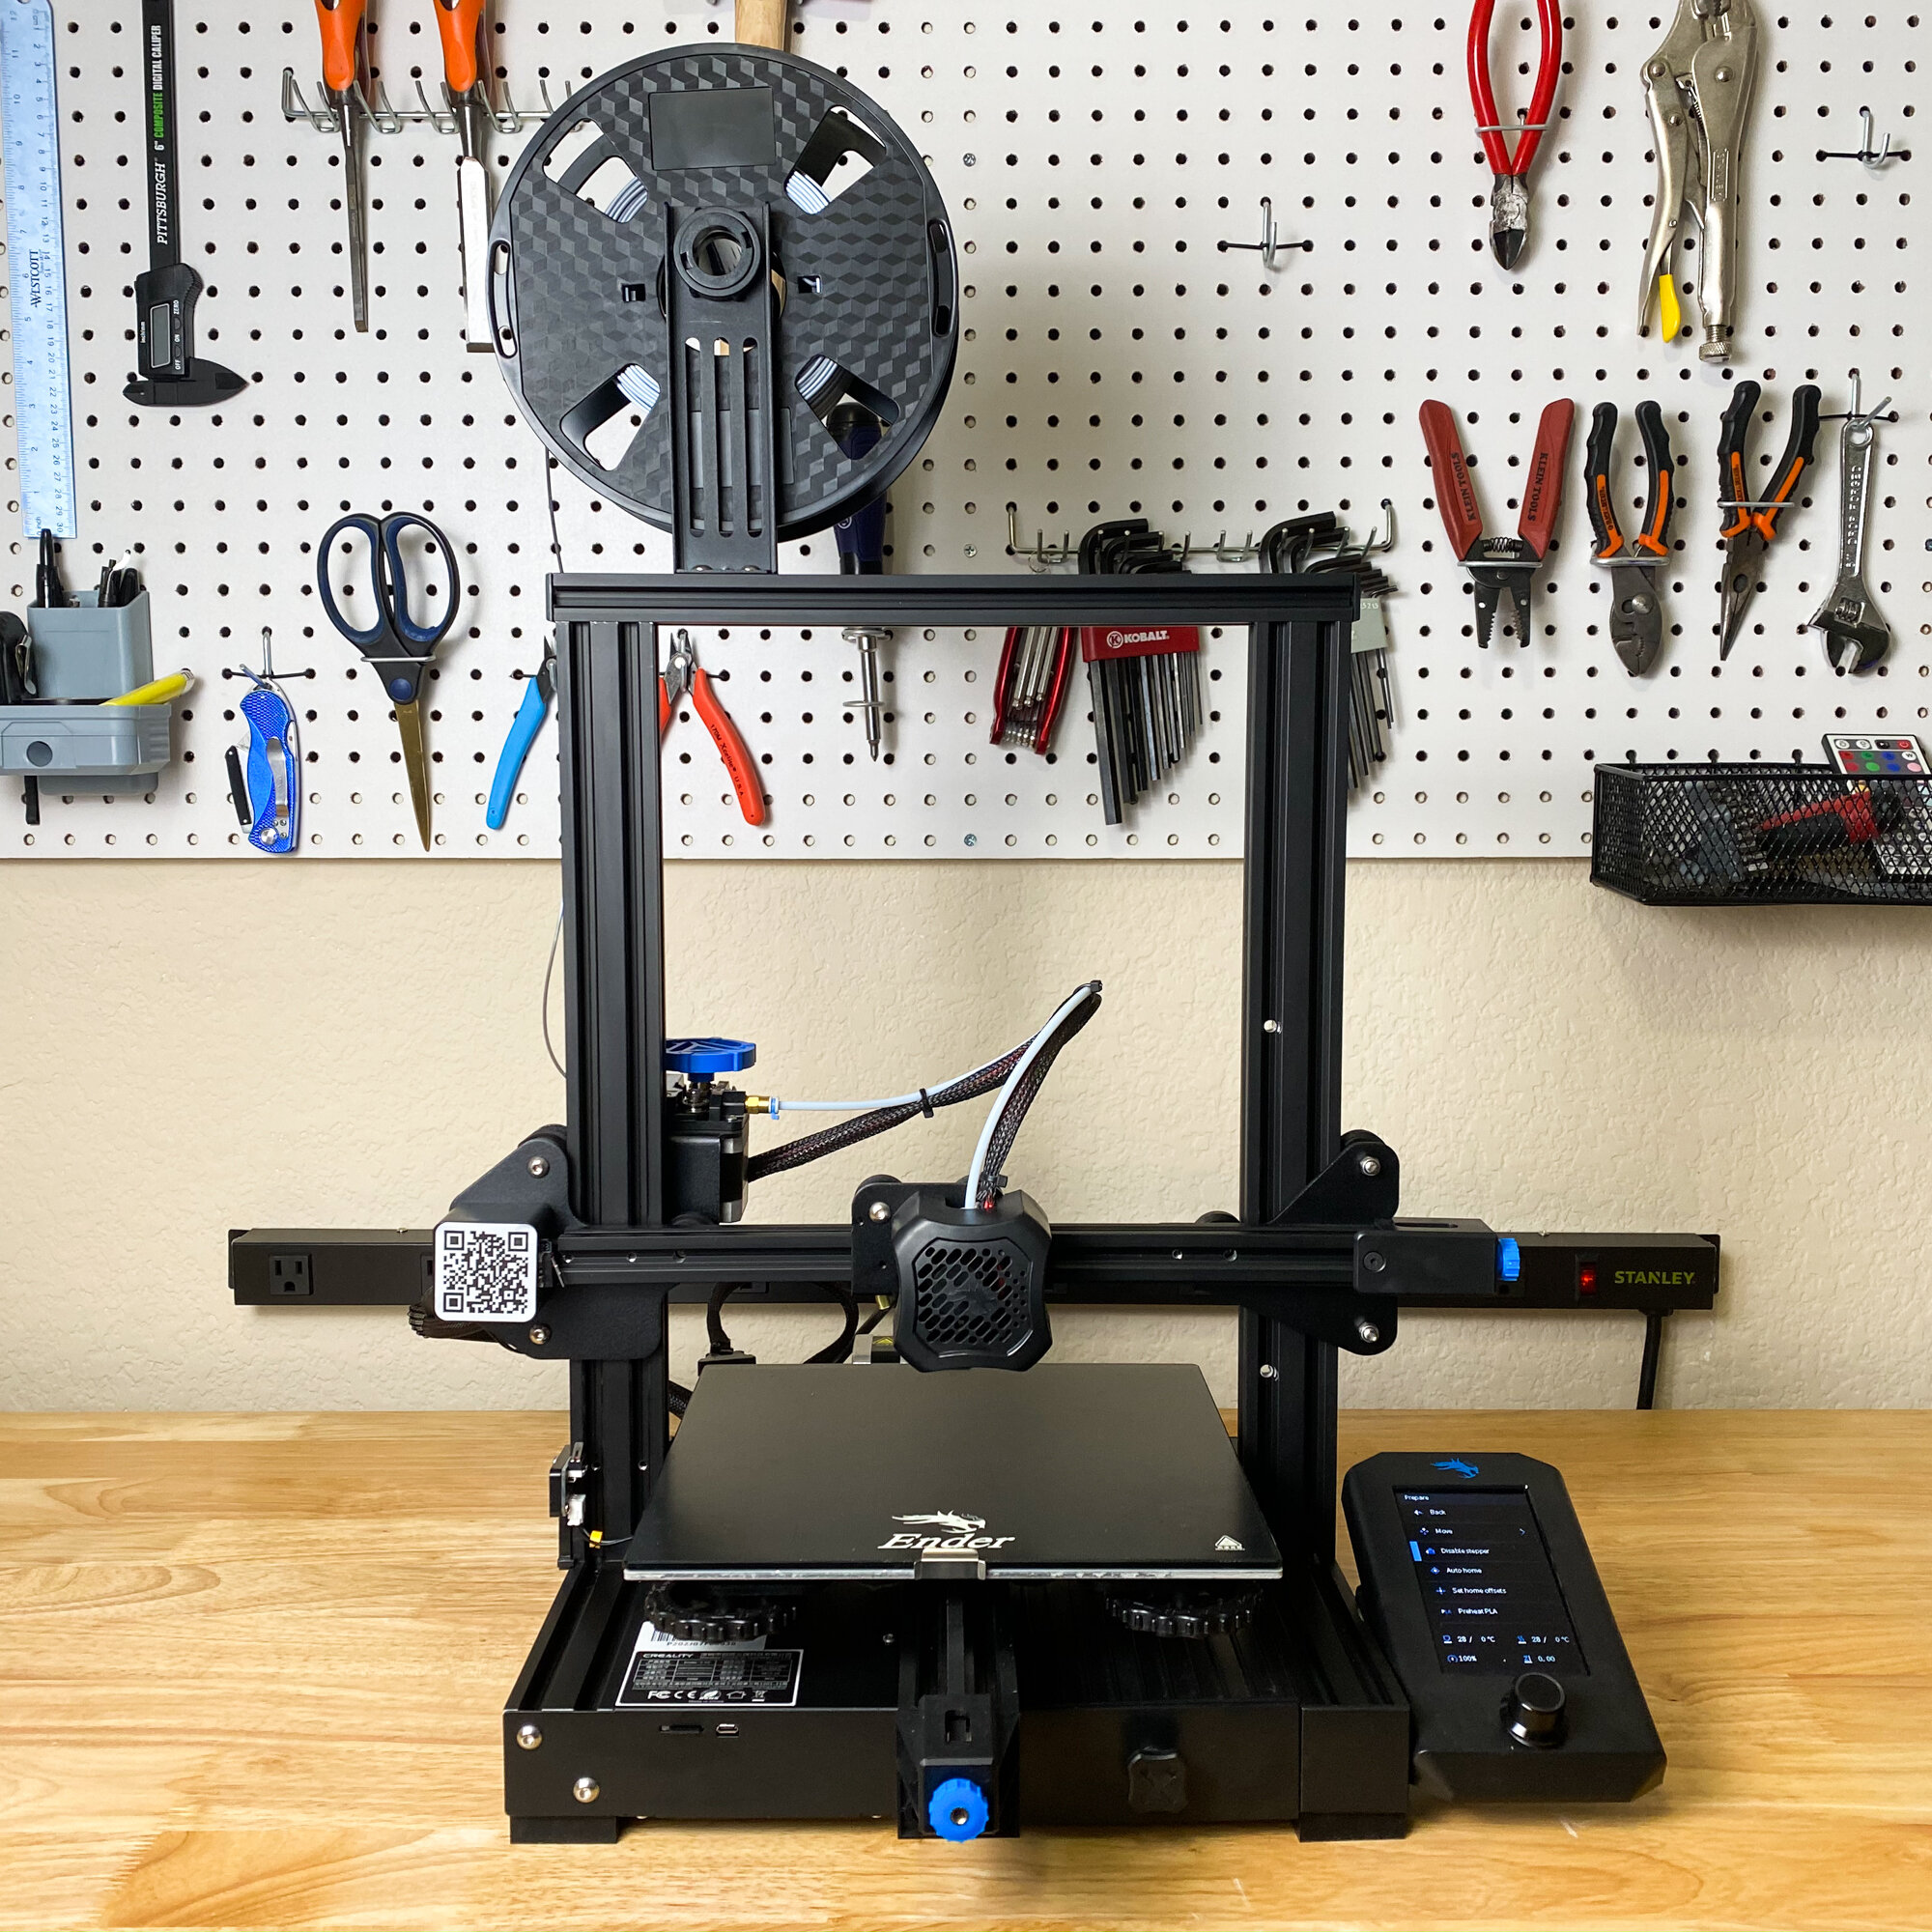 Changing Filament Ender 3 V2/Pro(The Right Way)